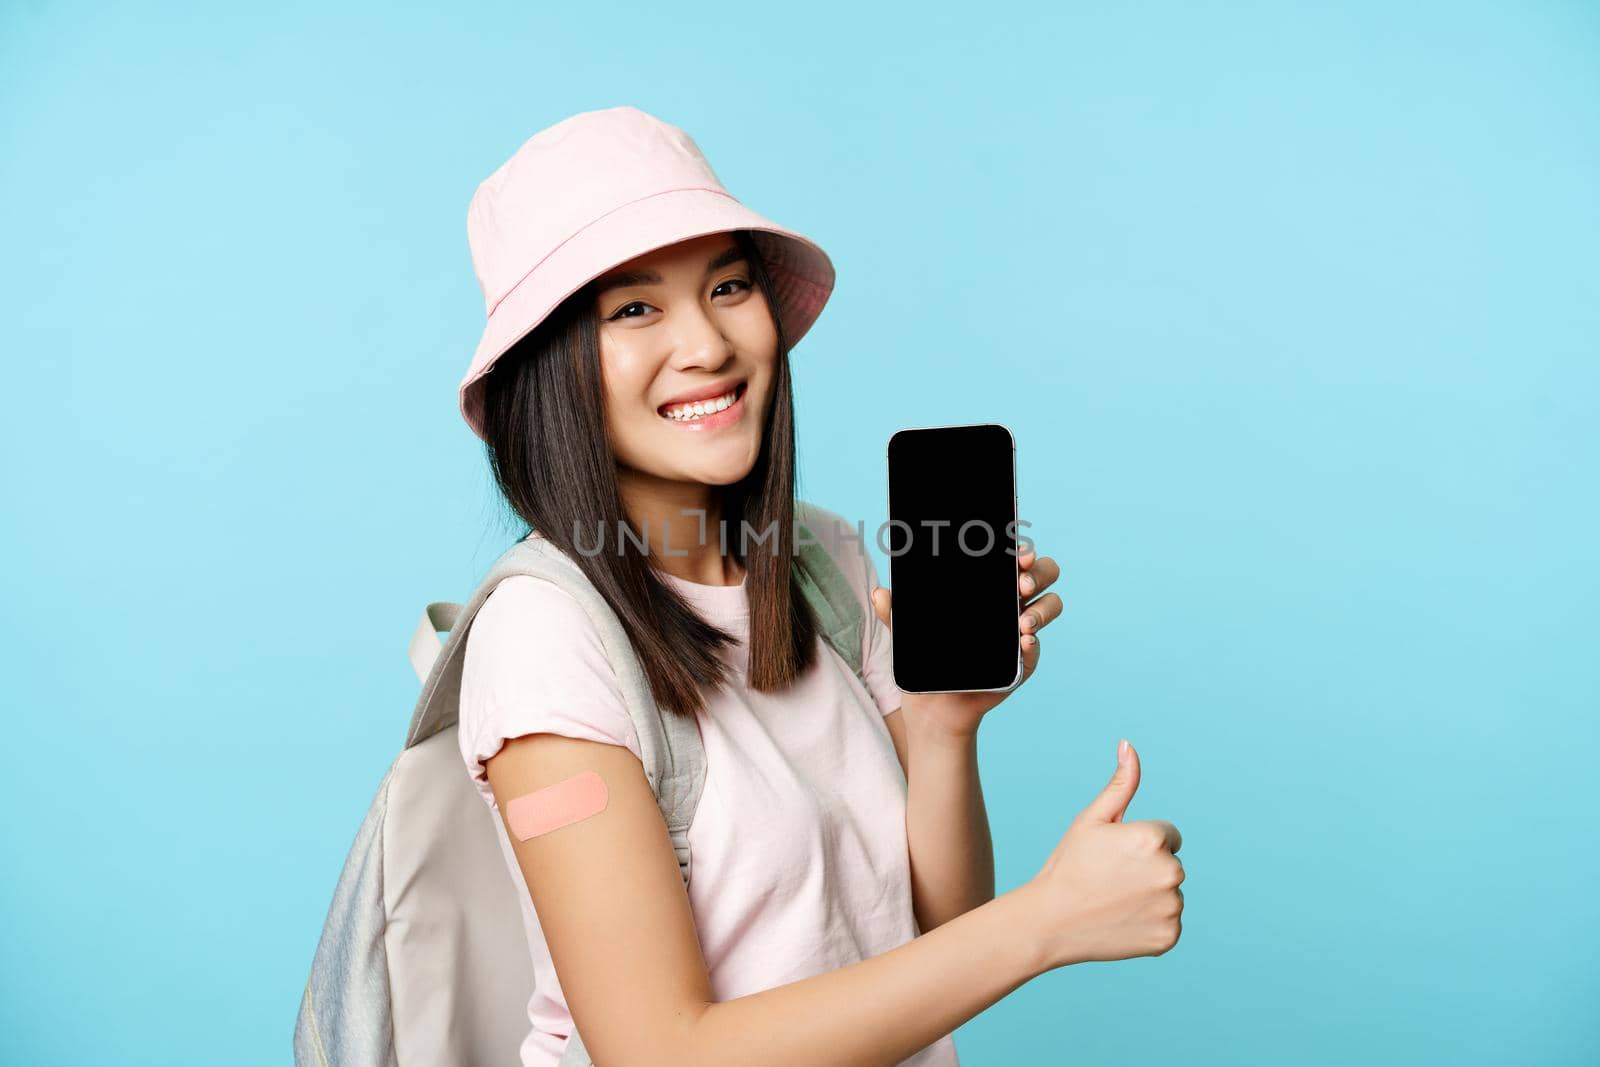 Smiling asian tourist shows arm with patch from covid-19 vaccination, showing coronavirus vaccine international certificate on smartphone app, thumbs up.